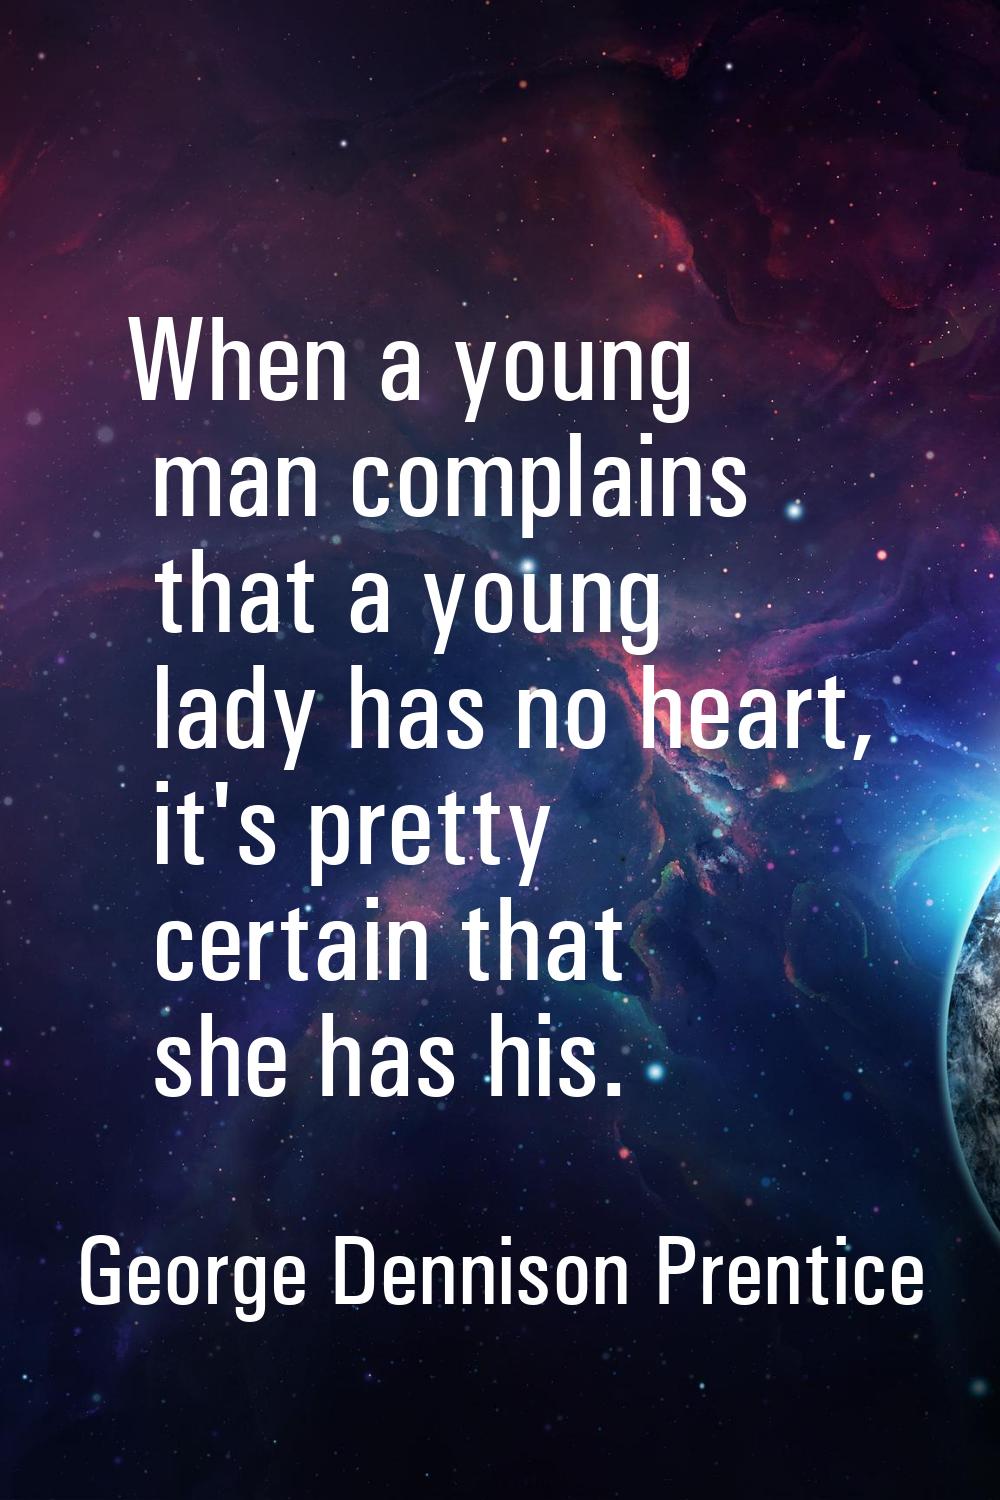 When a young man complains that a young lady has no heart, it's pretty certain that she has his.